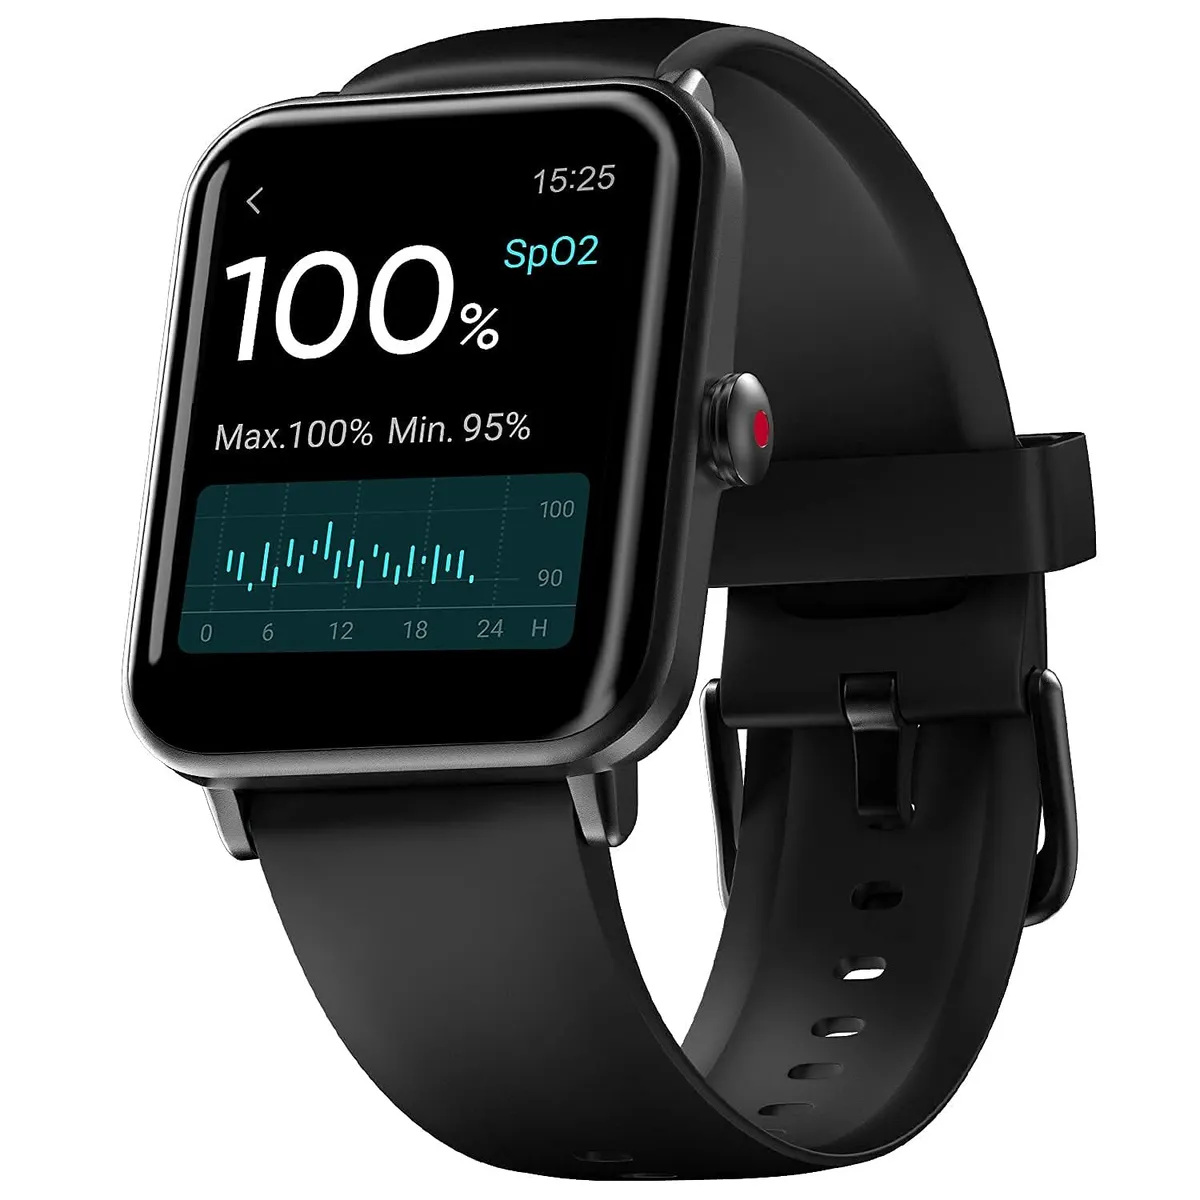 Noise Introduces New Apple Watch Lookalike at Under Rs 5,000 | Beebom-anthinhphatland.vn